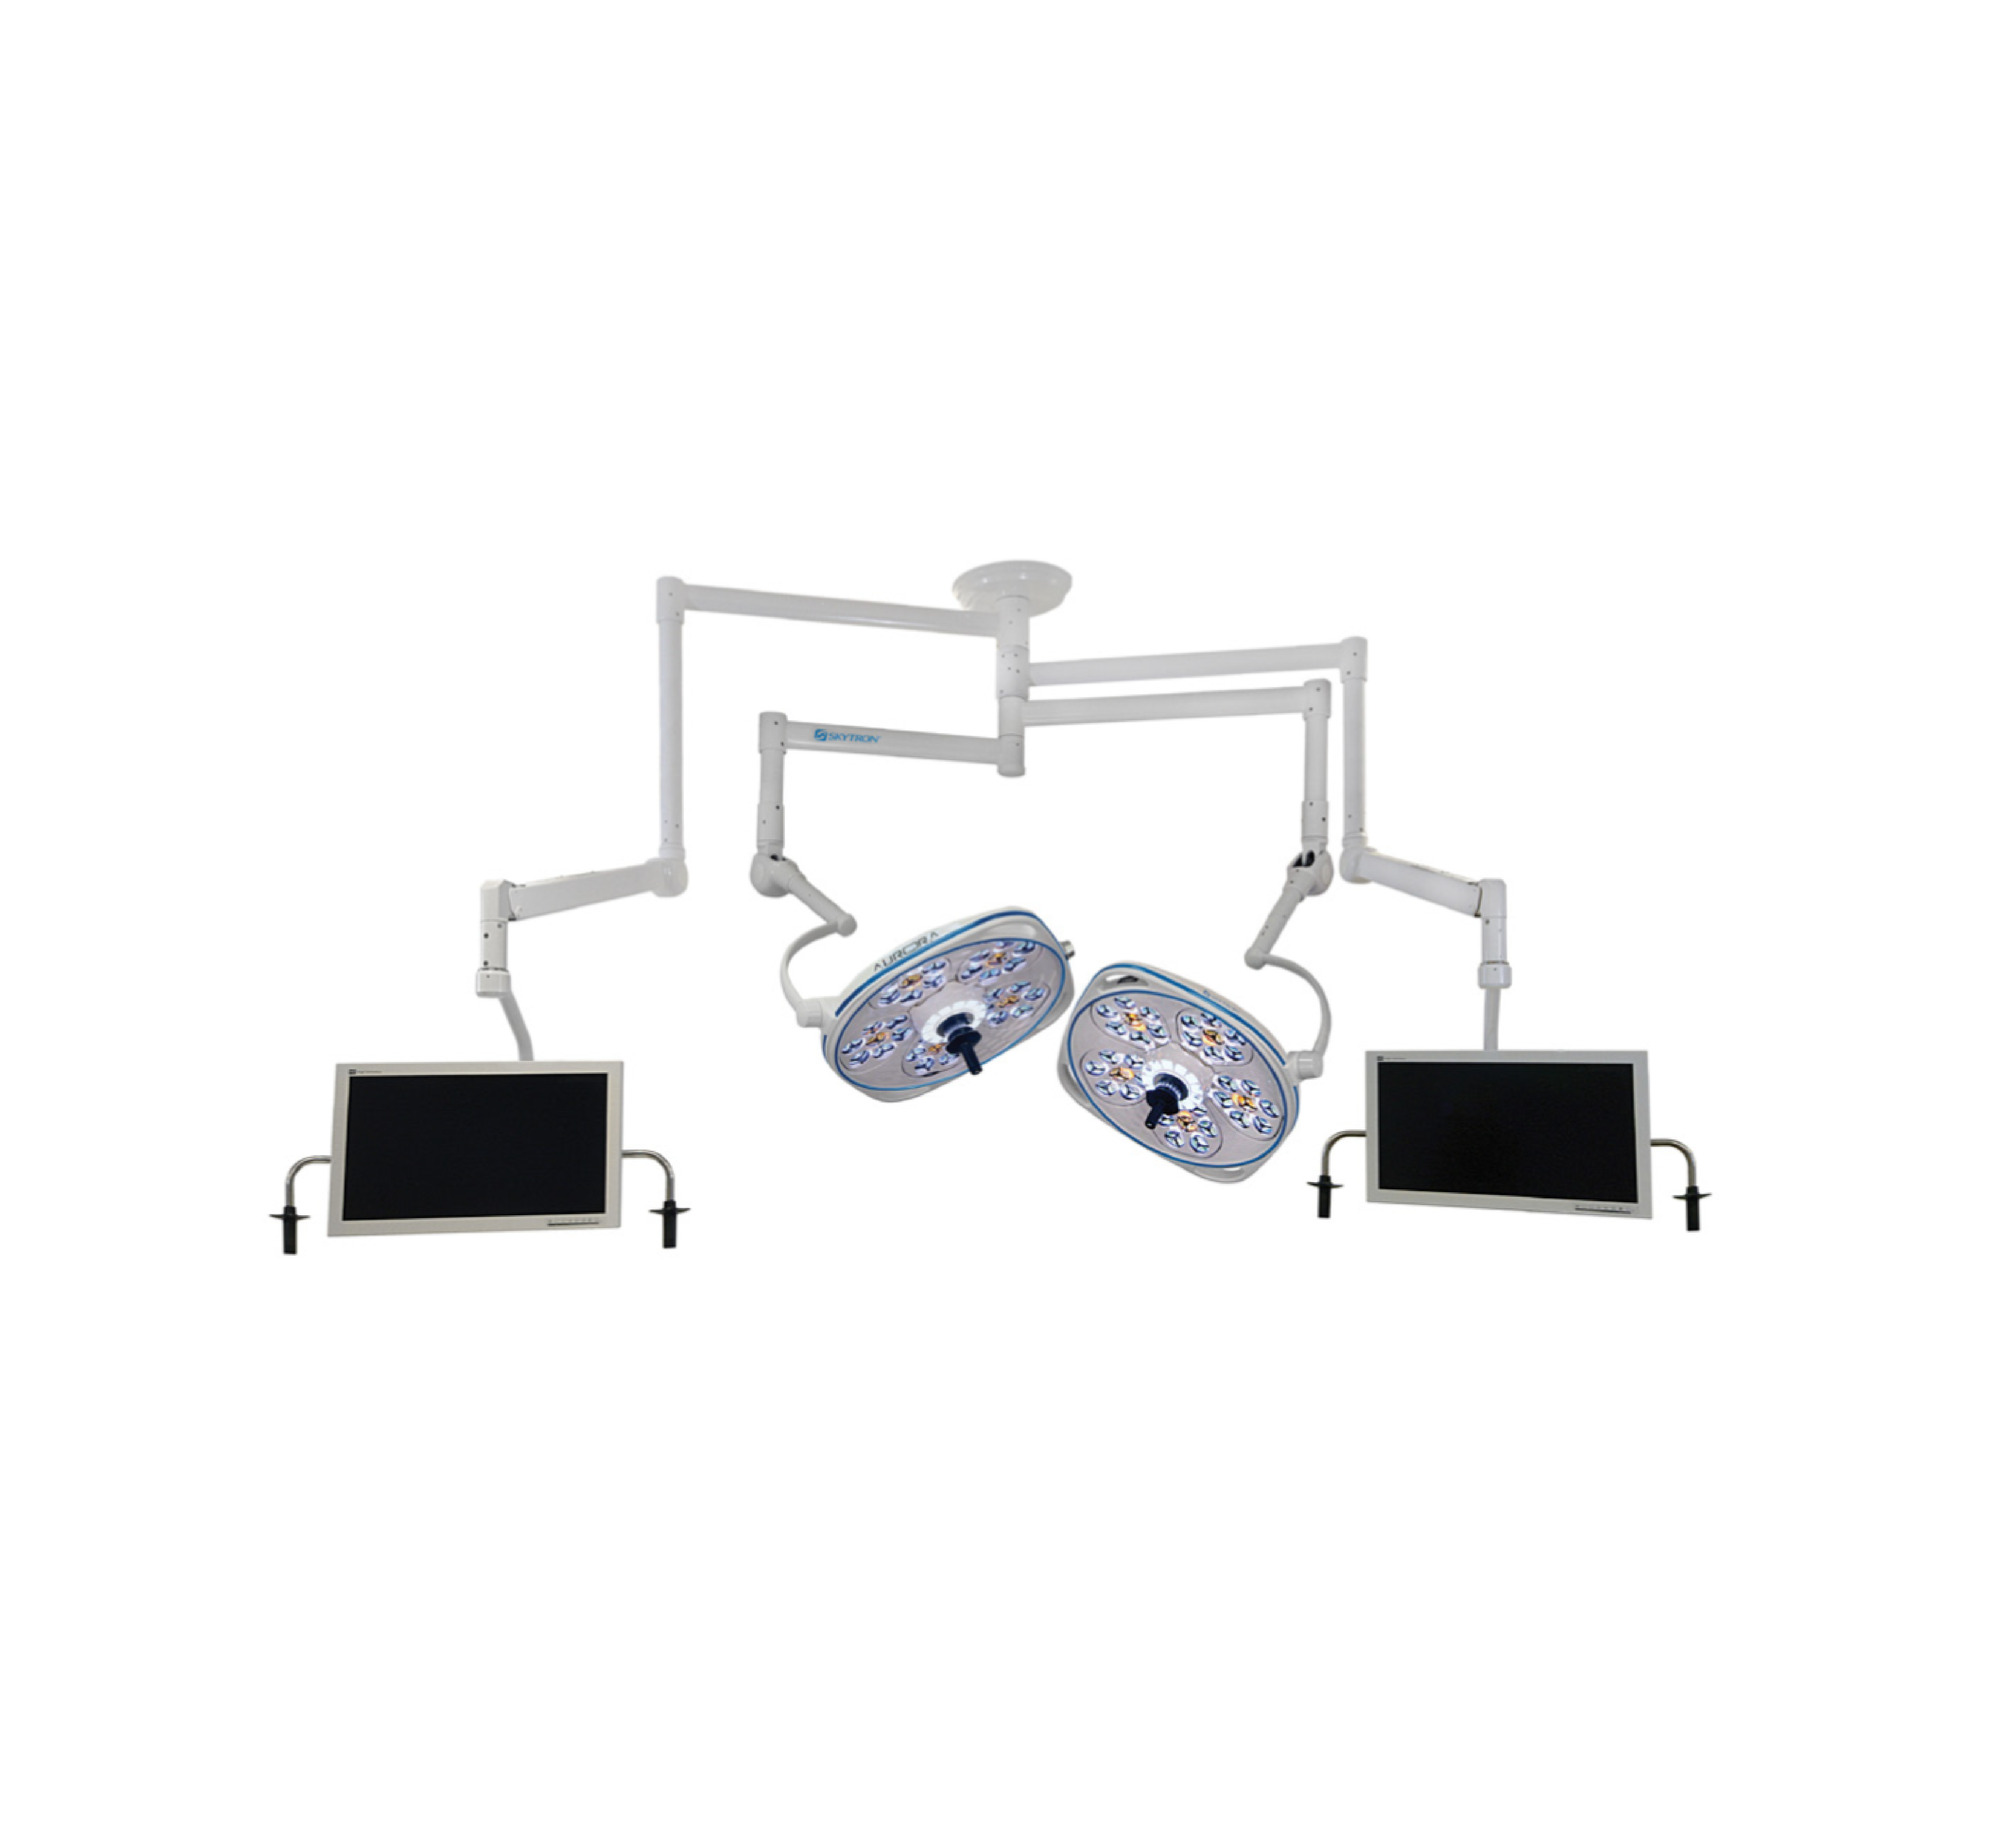 Dual, Variable-Focus 24 Inch LED Surgical Lighting Fixture with Dual Monitor Arms